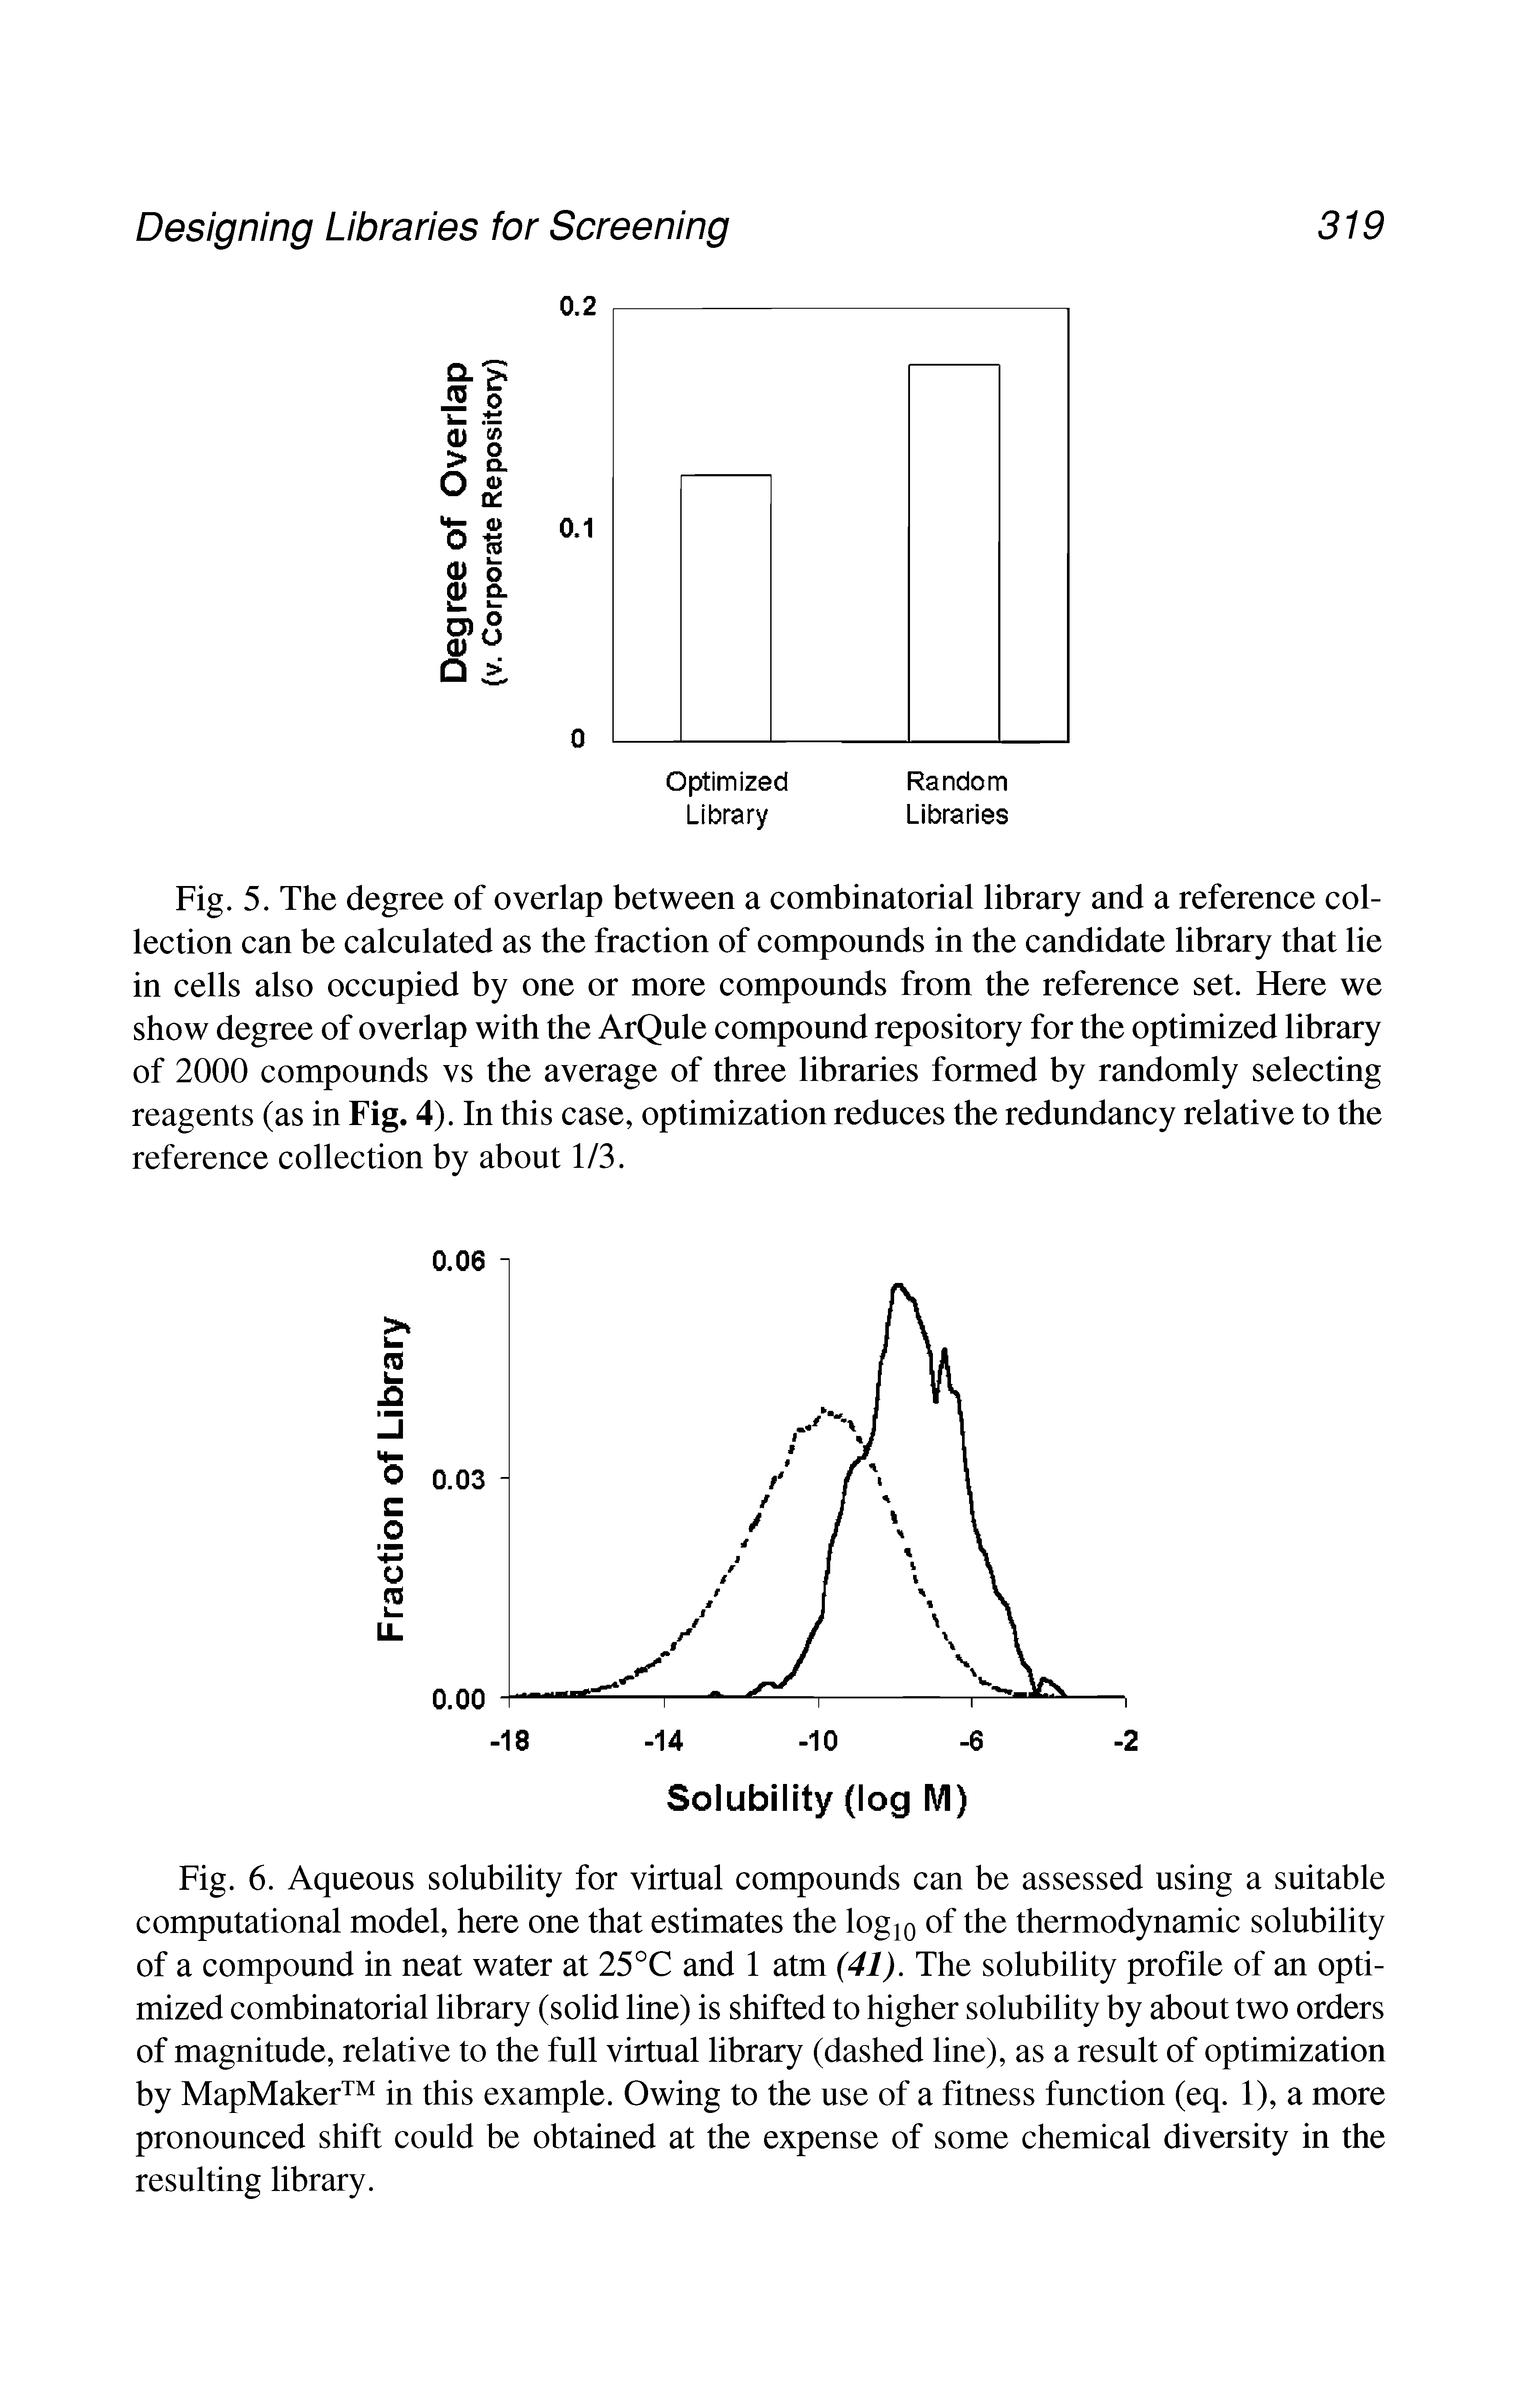 Fig. 6. Aqueous solubility for virtual compounds can be assessed using a suitable computational model, here one that estimates the logjo of the thermodynamic solubility of a compound in neat water at 25°C and 1 atm (41). The solubility profile of an optimized combinatorial library (solid line) is shifted to higher solubility by about two orders of magnitude, relative to the full virtual library (dashed line), as a result of optimization by MapMaker M in this example. Owing to the use of a fitness function (eq. 1), a more pronounced shift could be obtained at the expense of some chemical diversity in the resulting library.